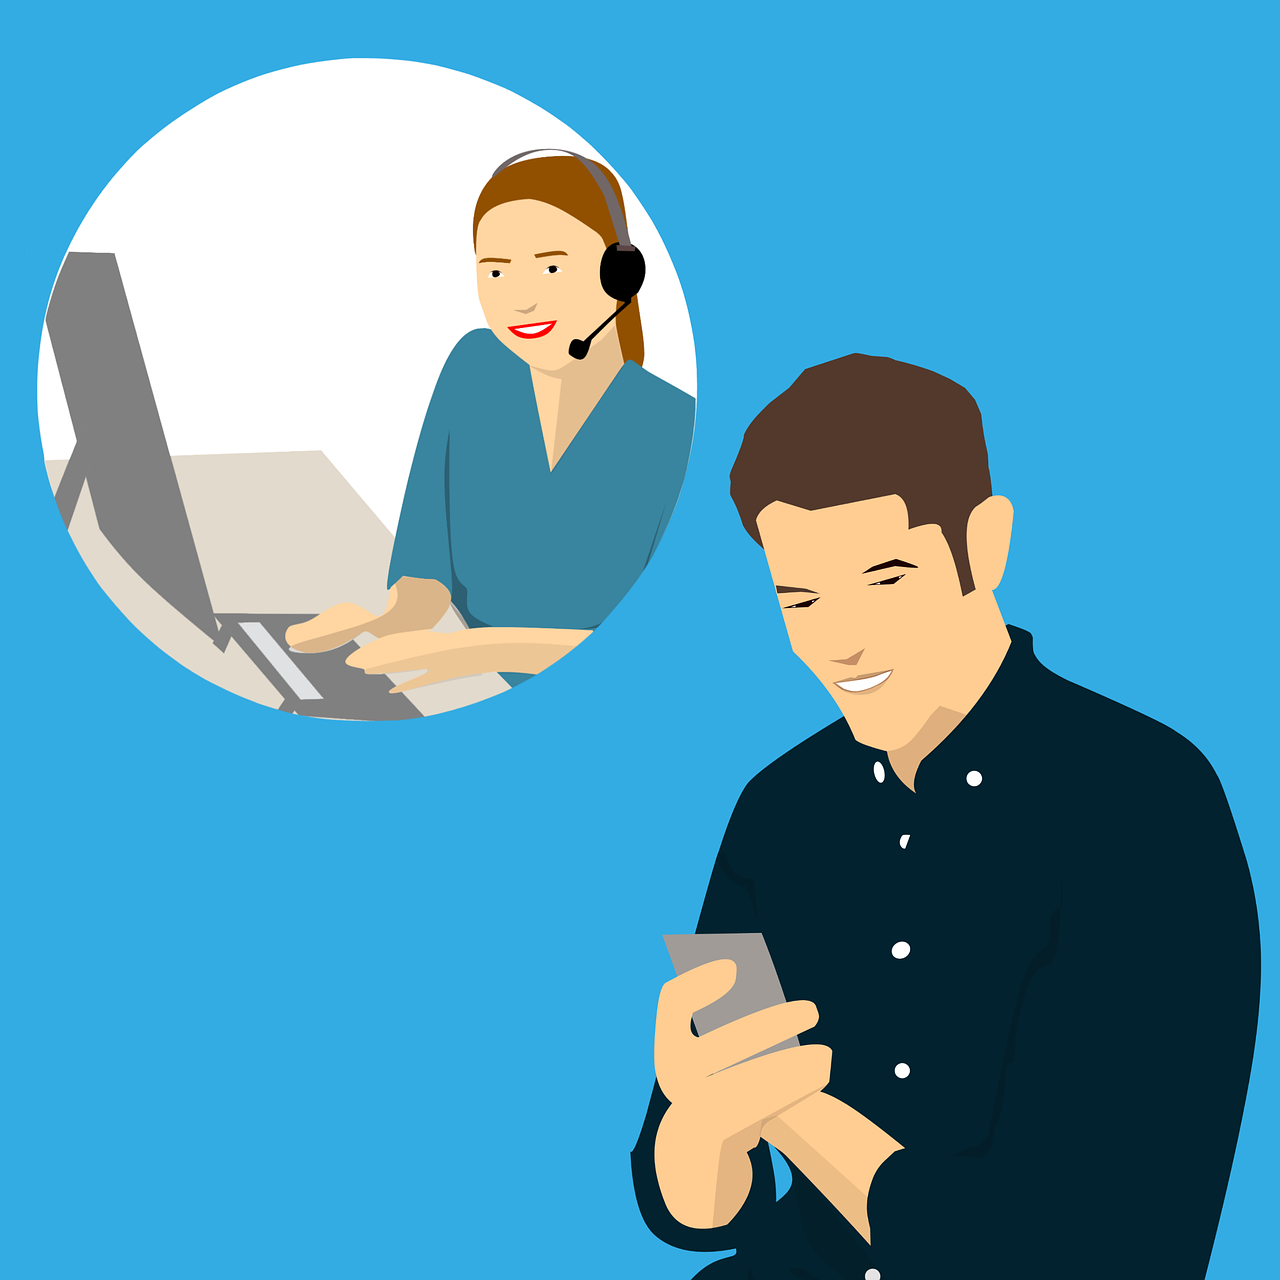 a man sitting in front of a laptop and talking on a cell phone, an illustration of, man and woman, working in a call center, with a blue background, portrait illustration